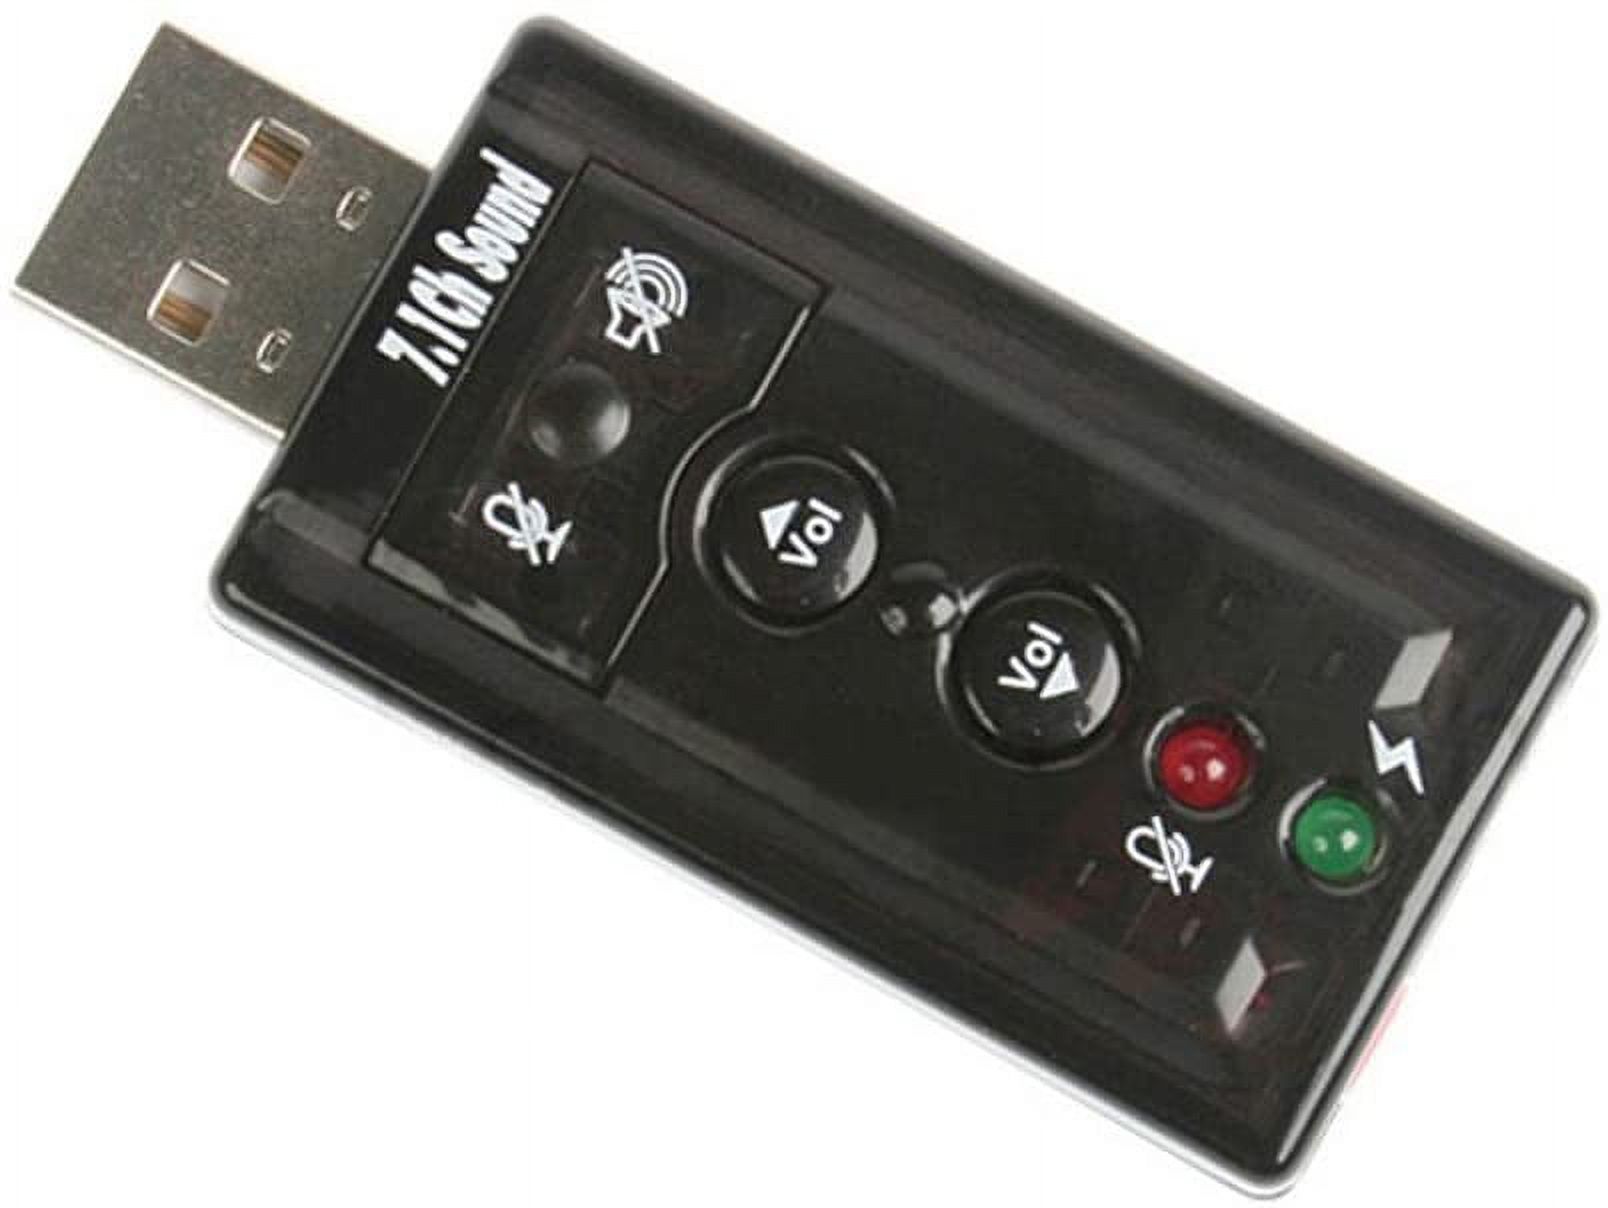 7.1 USB Stereo Audio Adapter External Sound Card - Sound card - stereo - USB 2.0 - ICUSBAUDIO7,Black - image 1 of 6